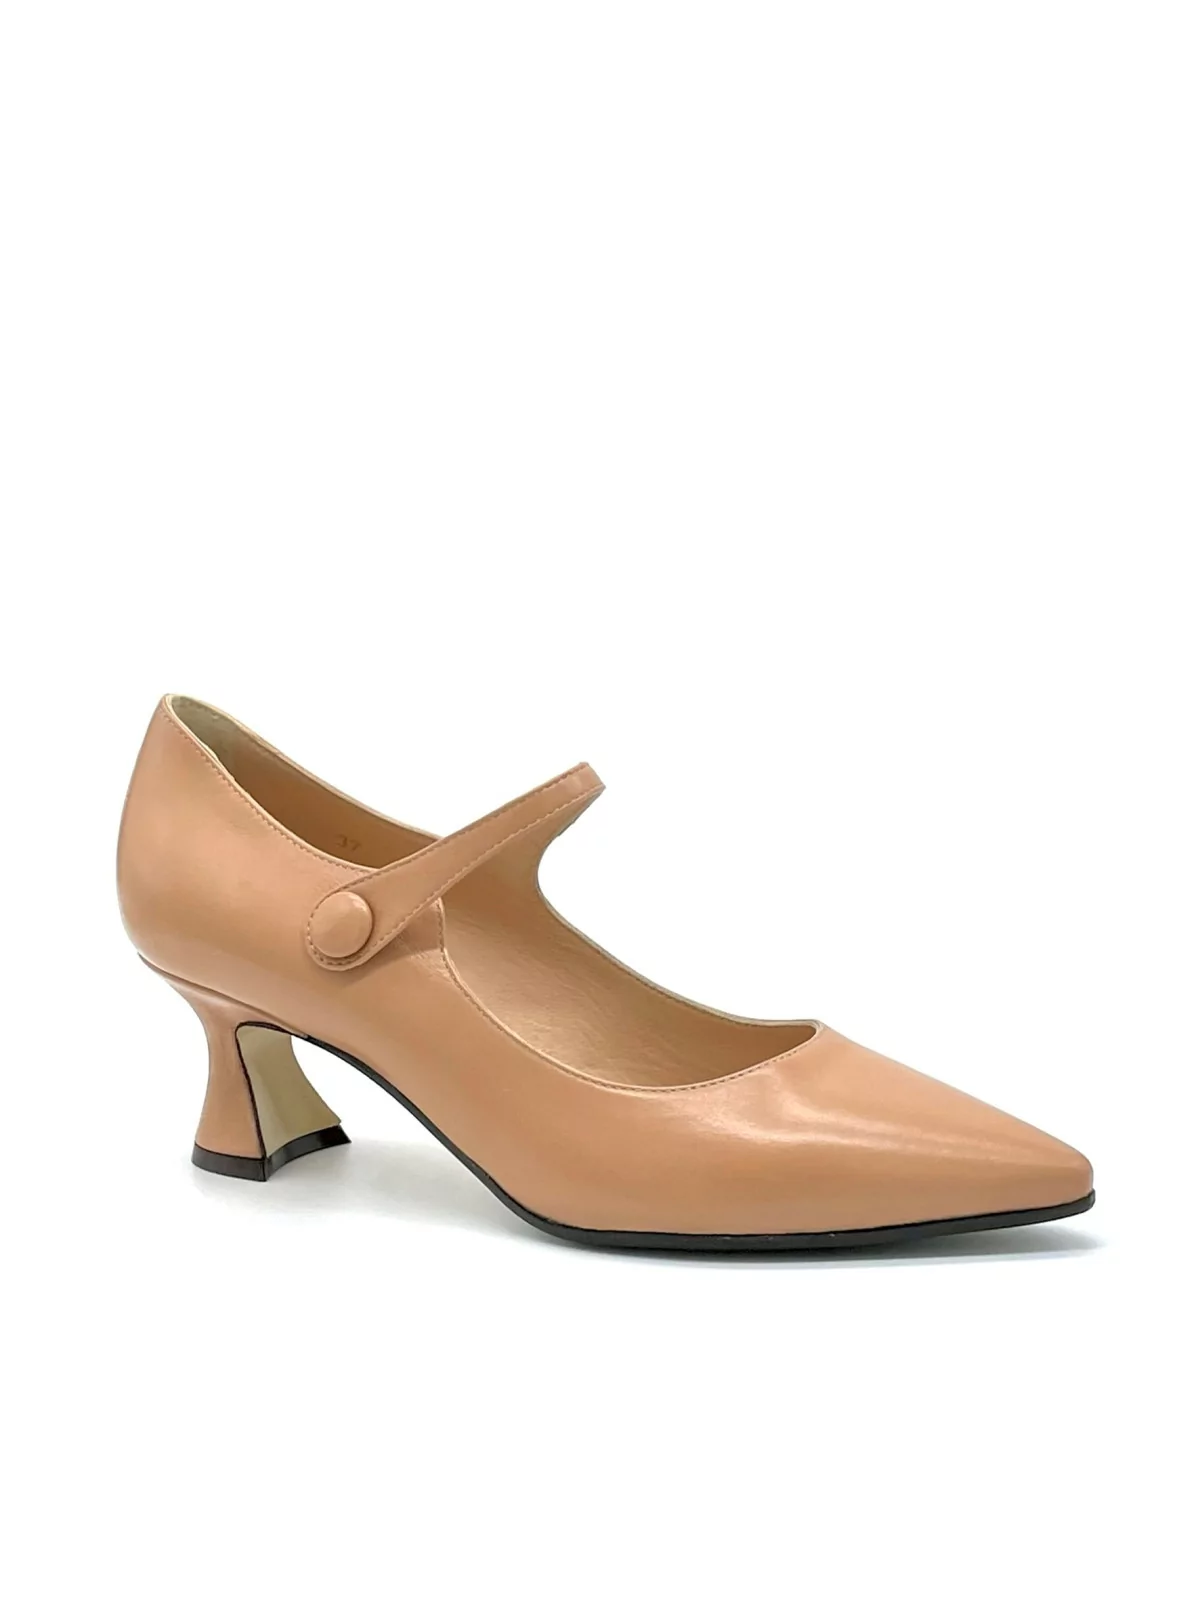 Beige leather Mary Jane pump with covered button. Leather lining, leather and ru